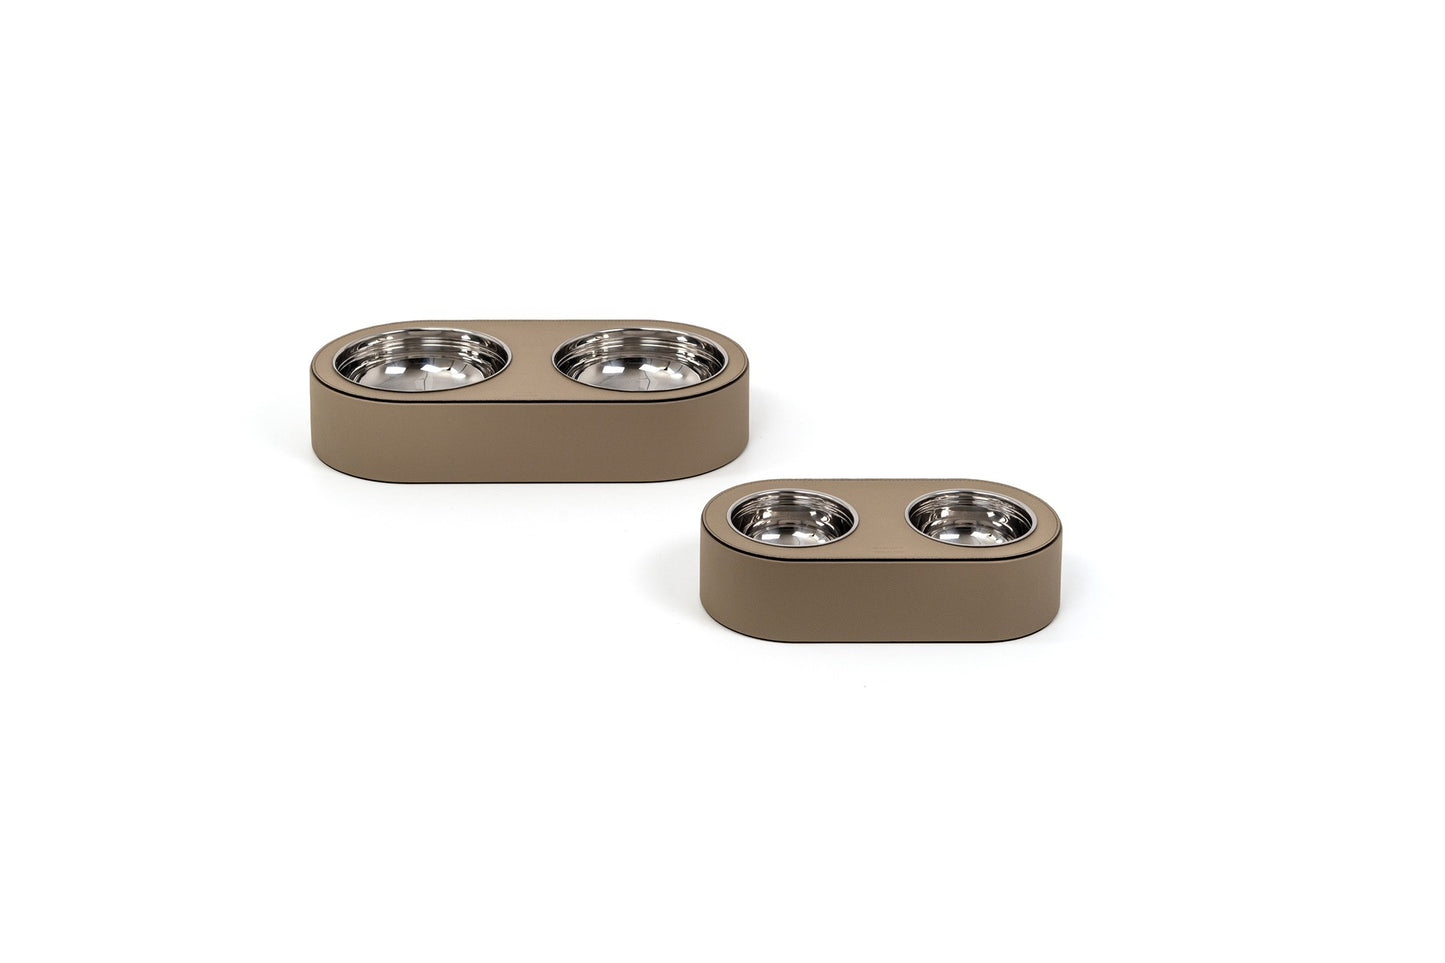 Pinetti Leather-Covered Pet Bowl With Removable Stainless Steel Bowls | Structure covered in leather | Two removable and washable stainless steel bowls | Available in two sizes | Discover Luxury Lifestyle Accessories at 2Jour Concierge, #1 luxury high-end gift & lifestyle shop